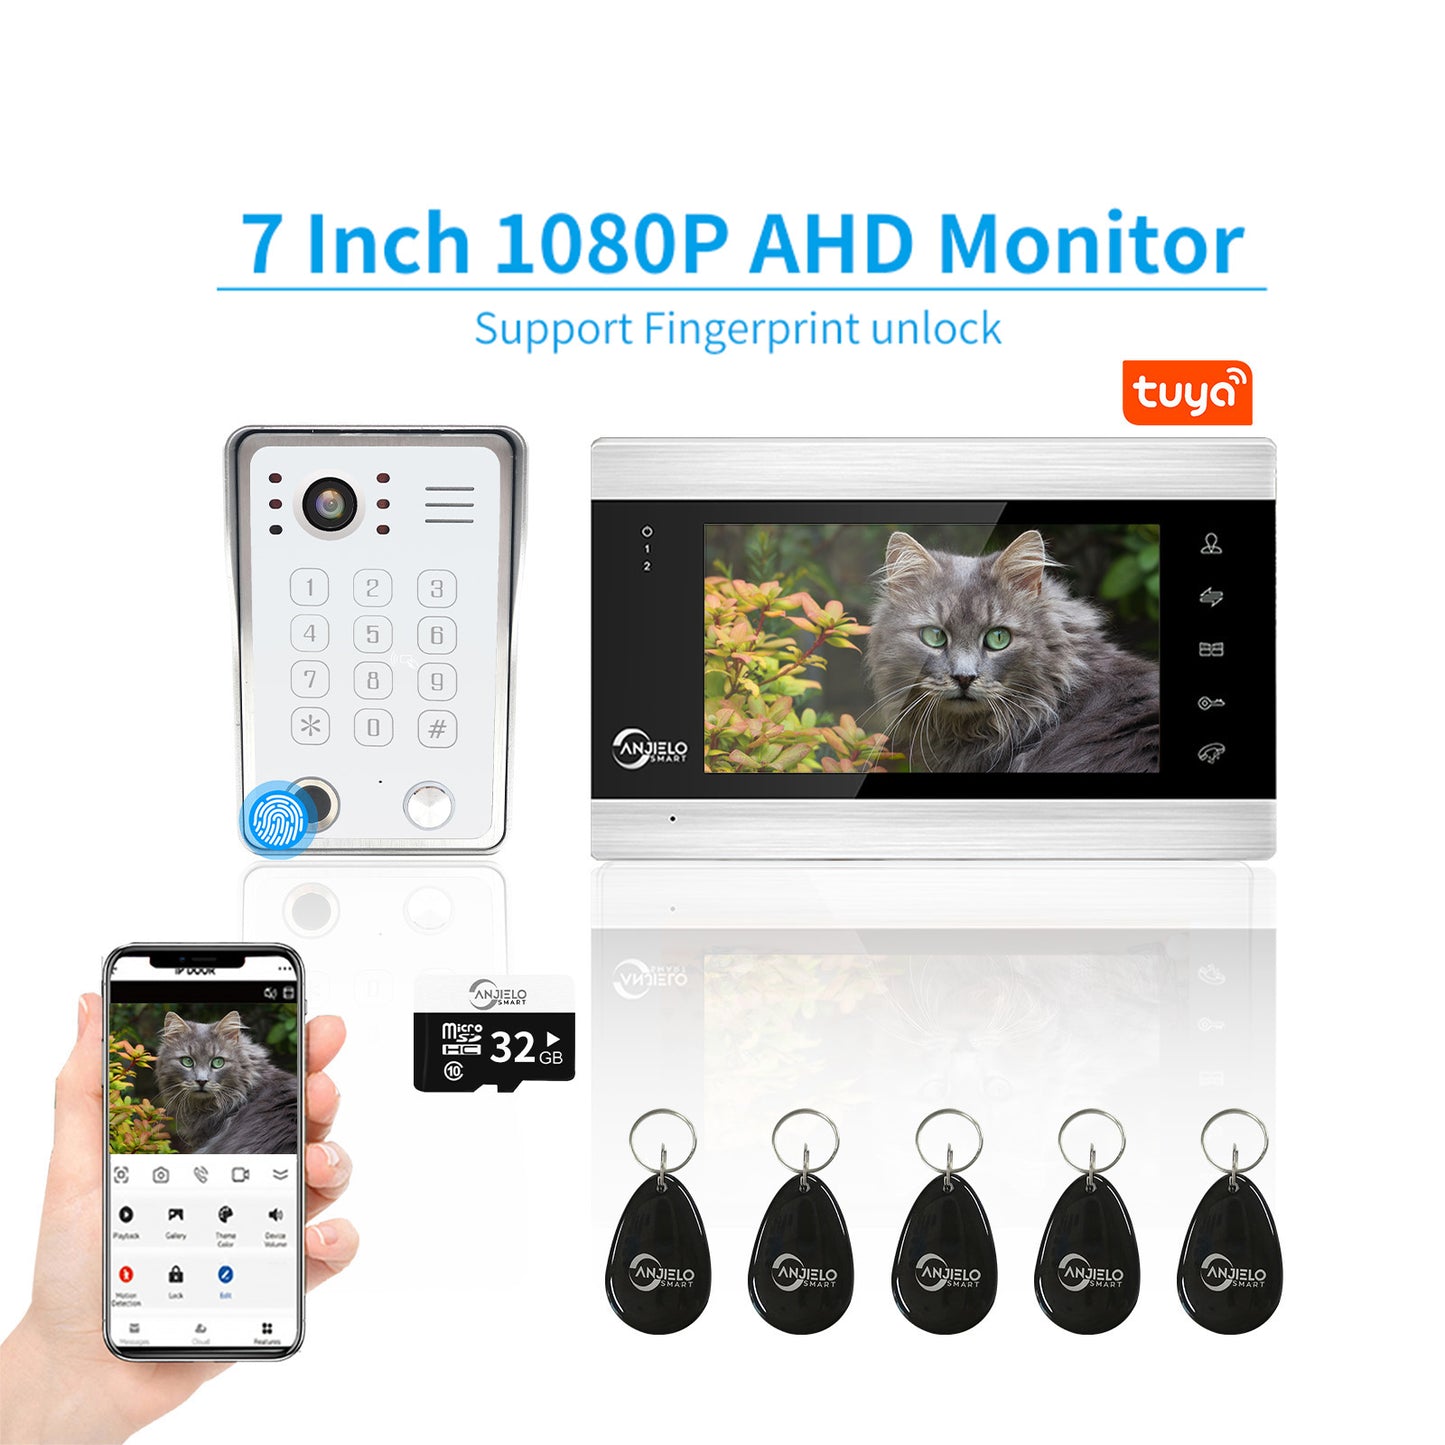 7 inch Touch Button screen Video Door Phone Rfid Card Access Control System Doorbell with Fingerprint and password unlock Video Intercom System